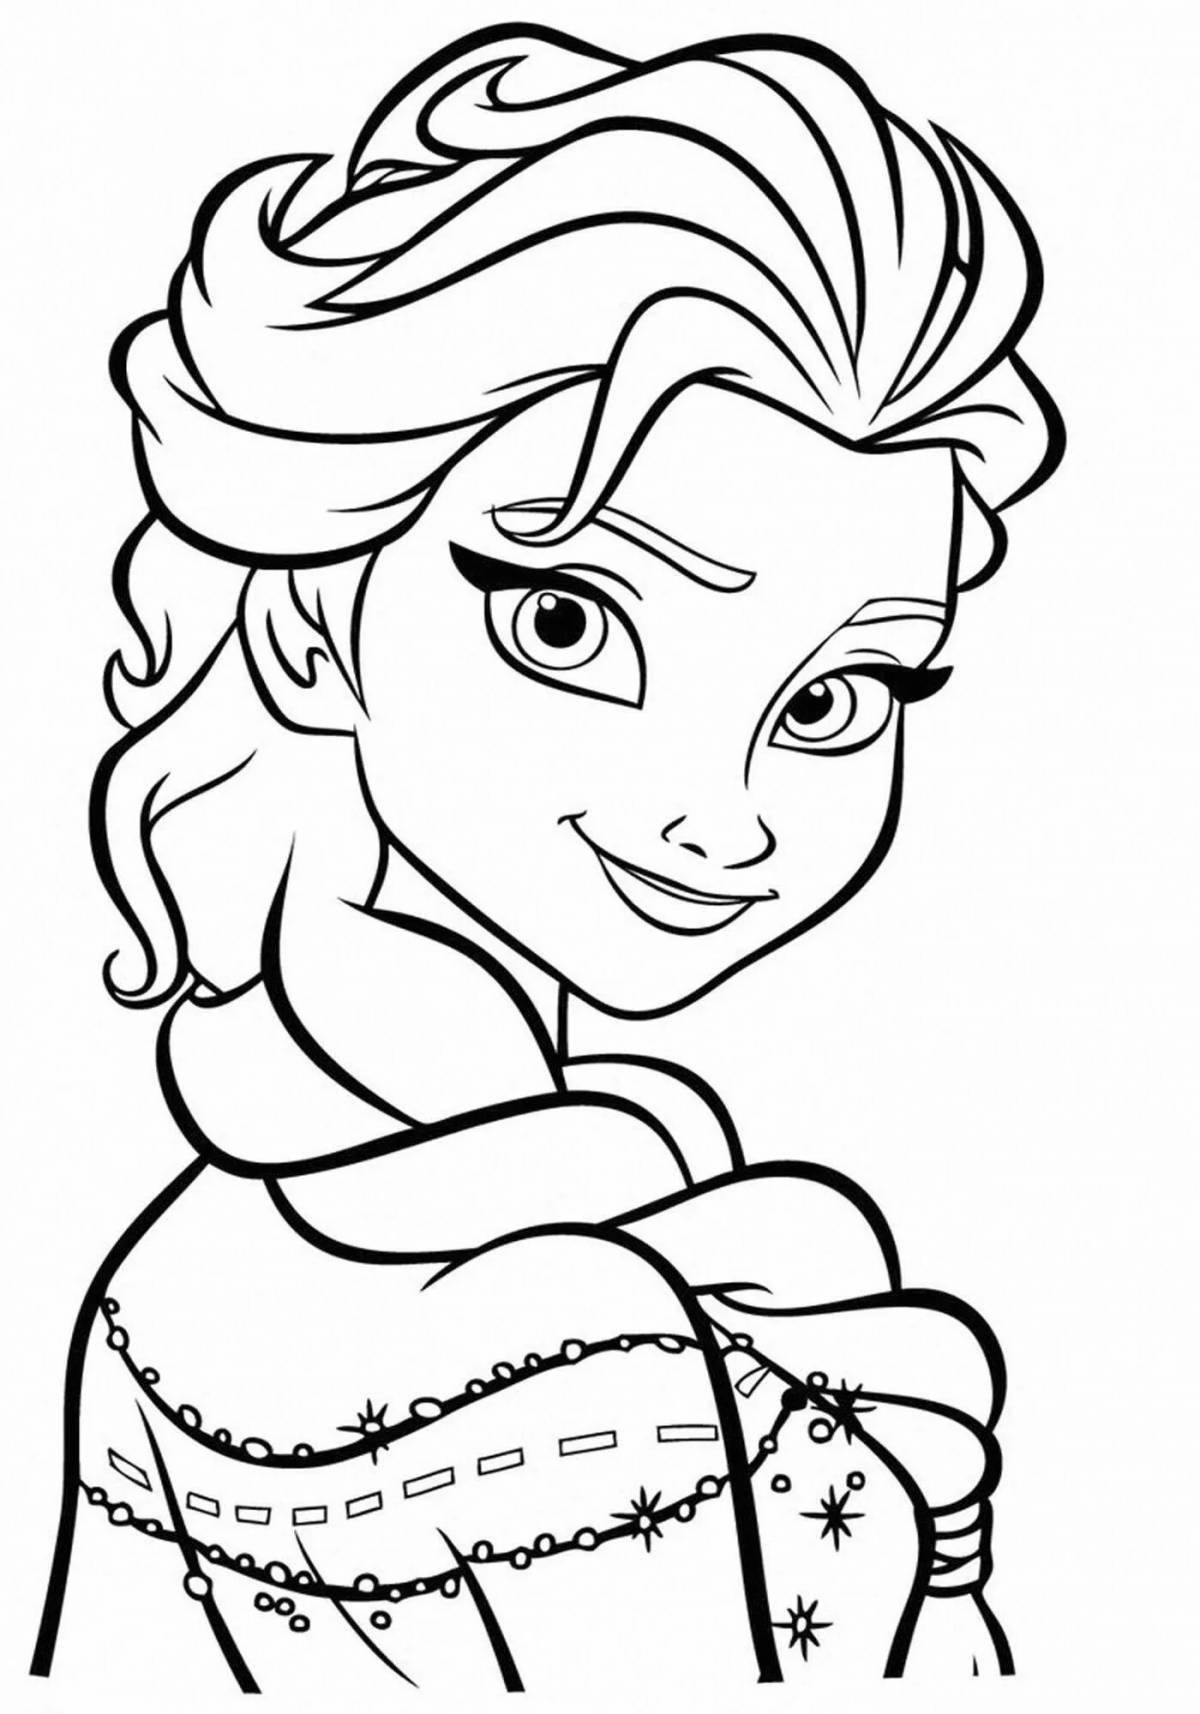 Elsa fairytale coloring book for kids 4-5 years old